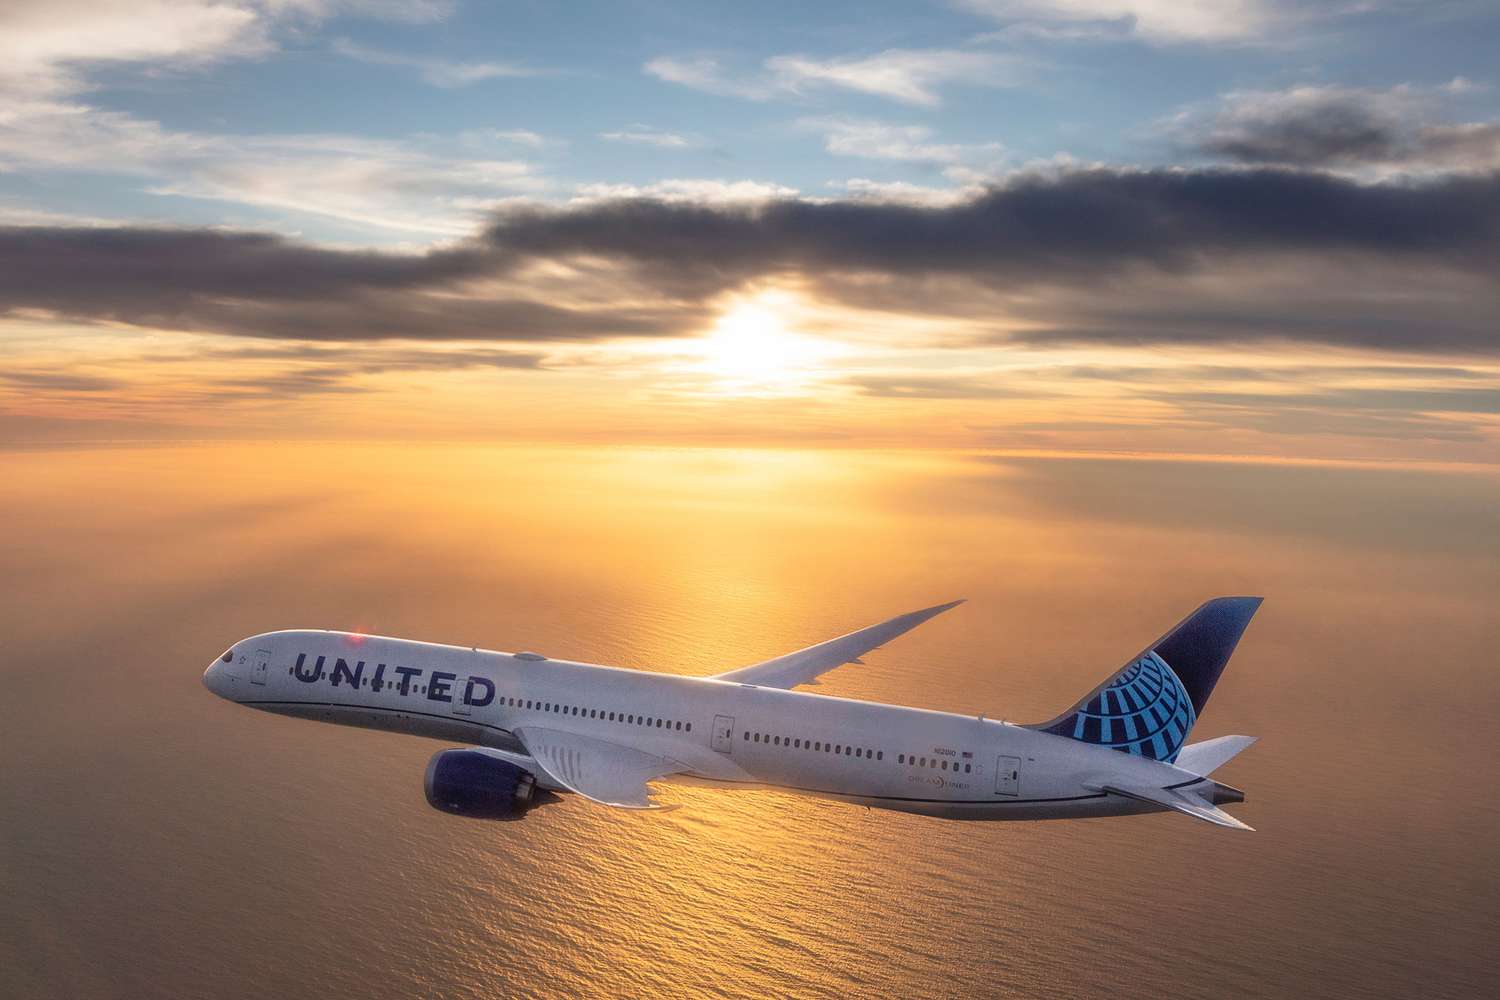 united-just-launched-a-fall-flight-sale-to-these-us.-cities-—-and-we-have-the-promo-code